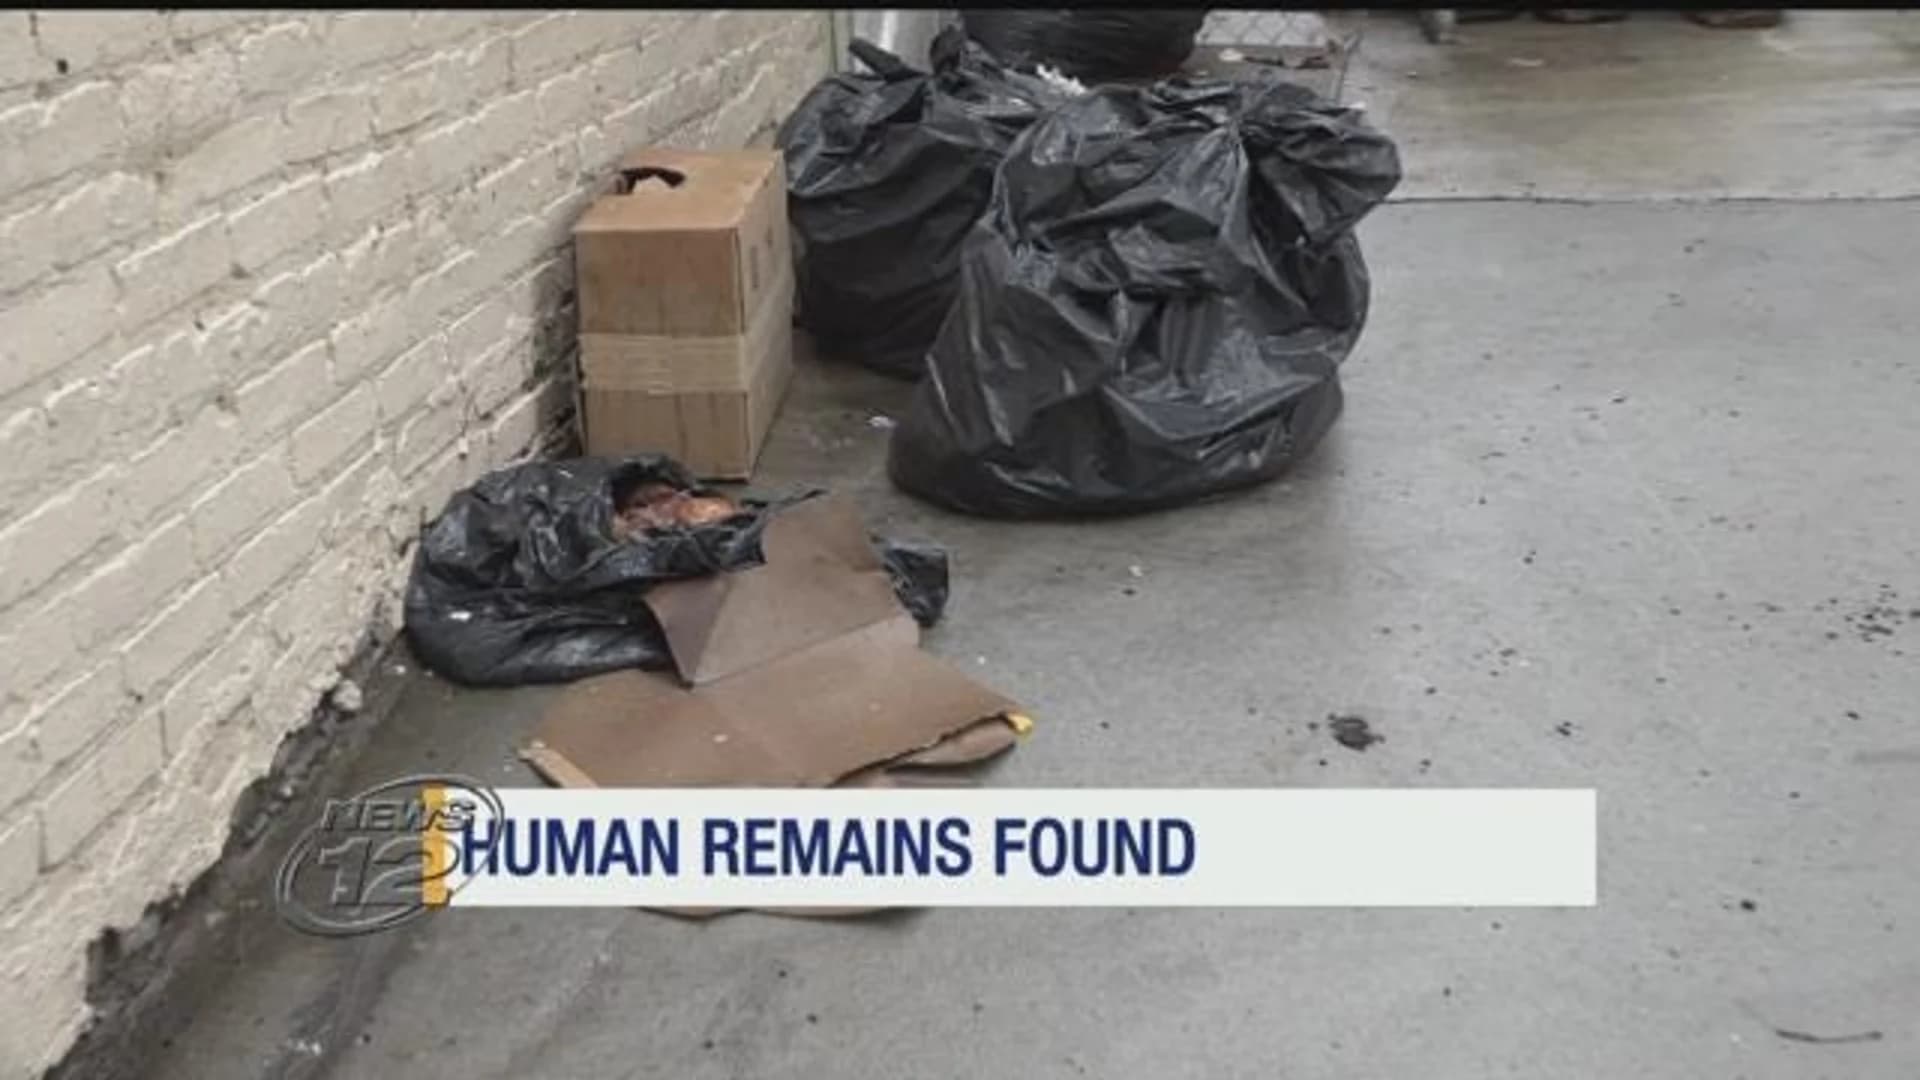 Human remains found in Yonkers